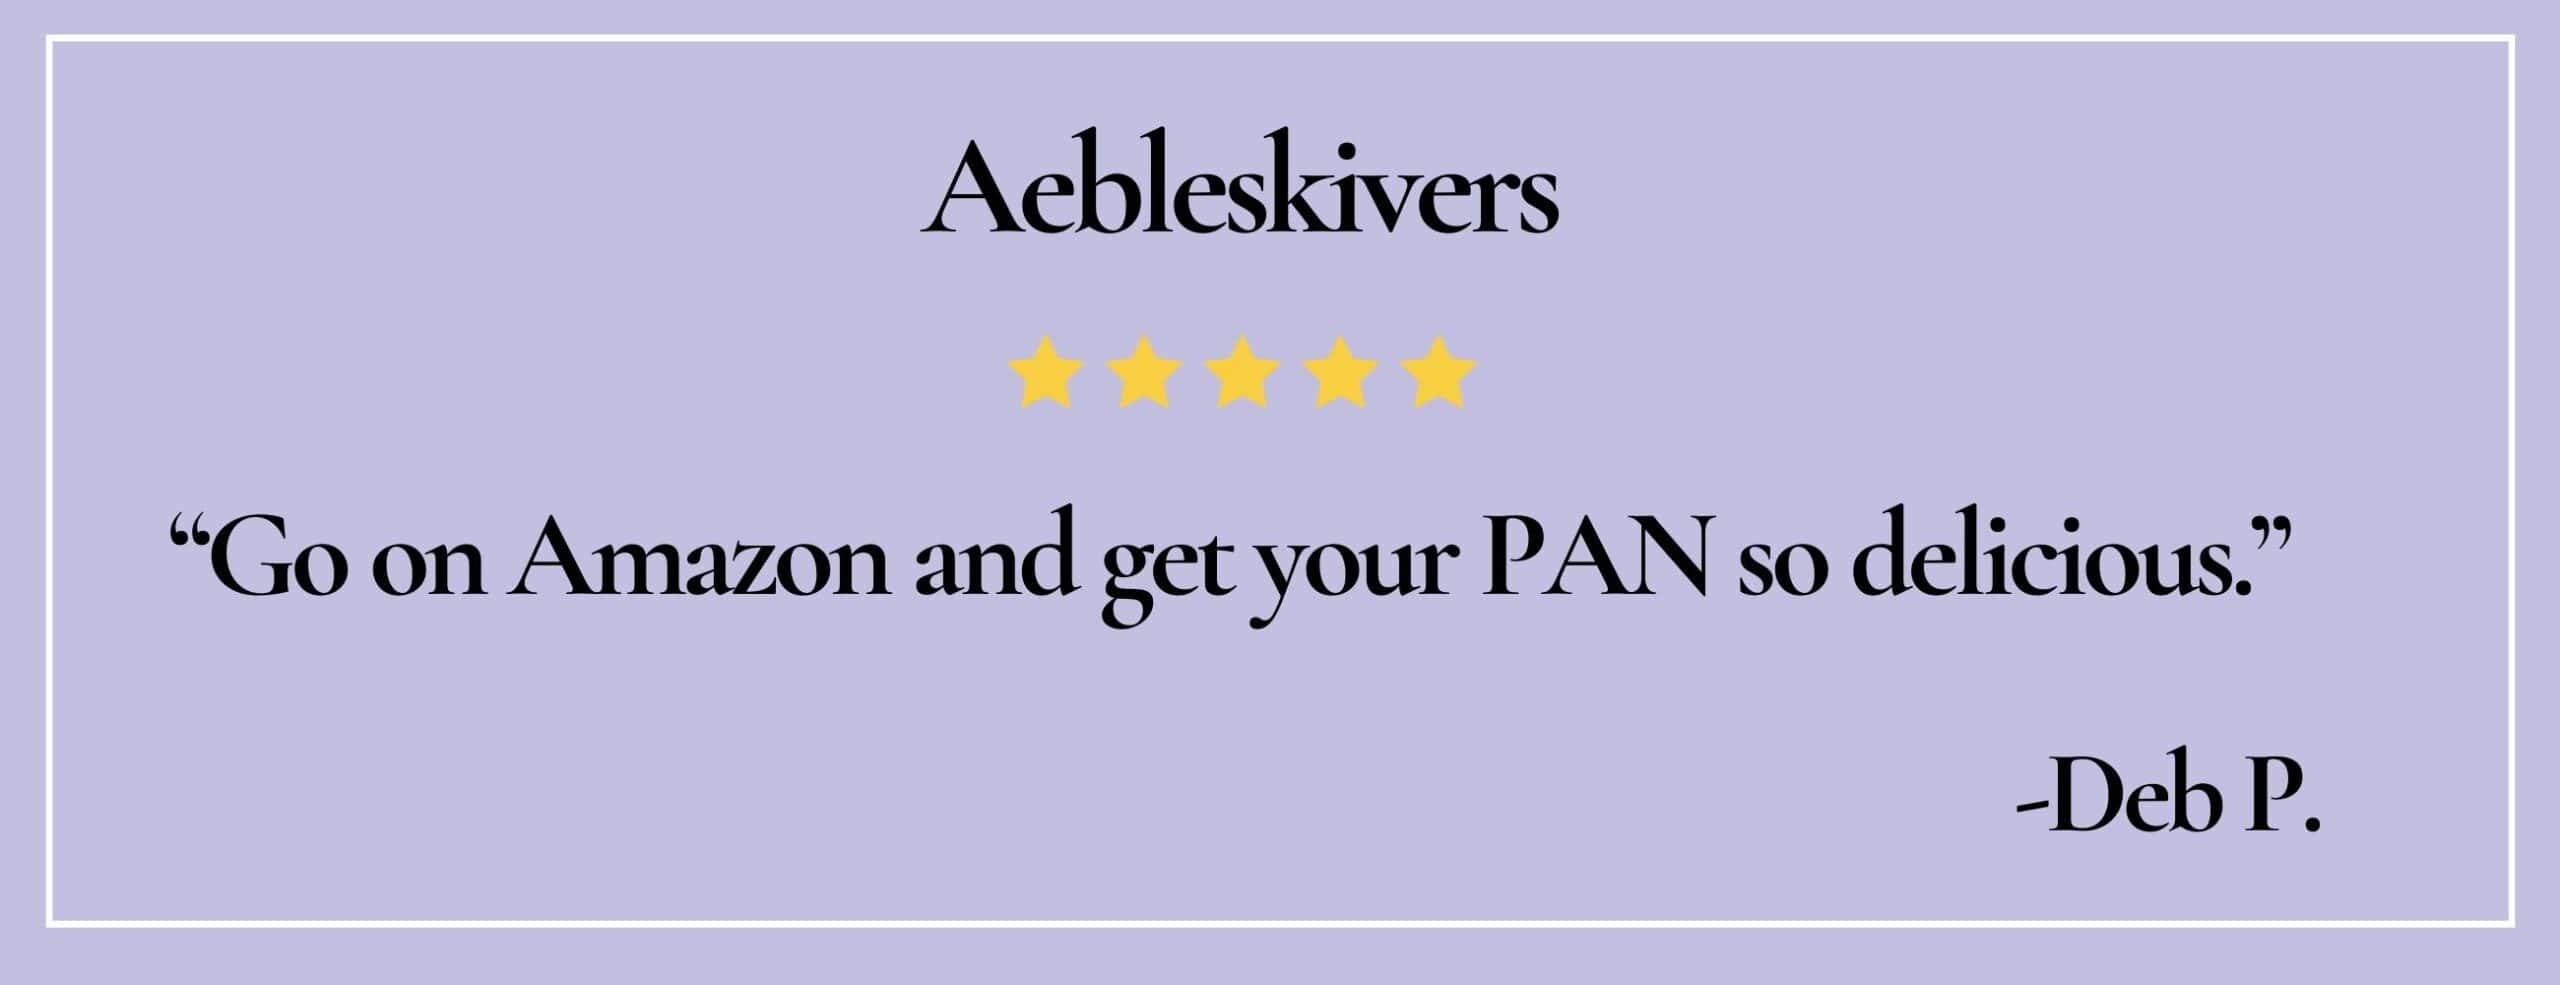 Text box with quote: Aebleskivers "Go on Amazon and get your PAN so delicious" -Deb P.